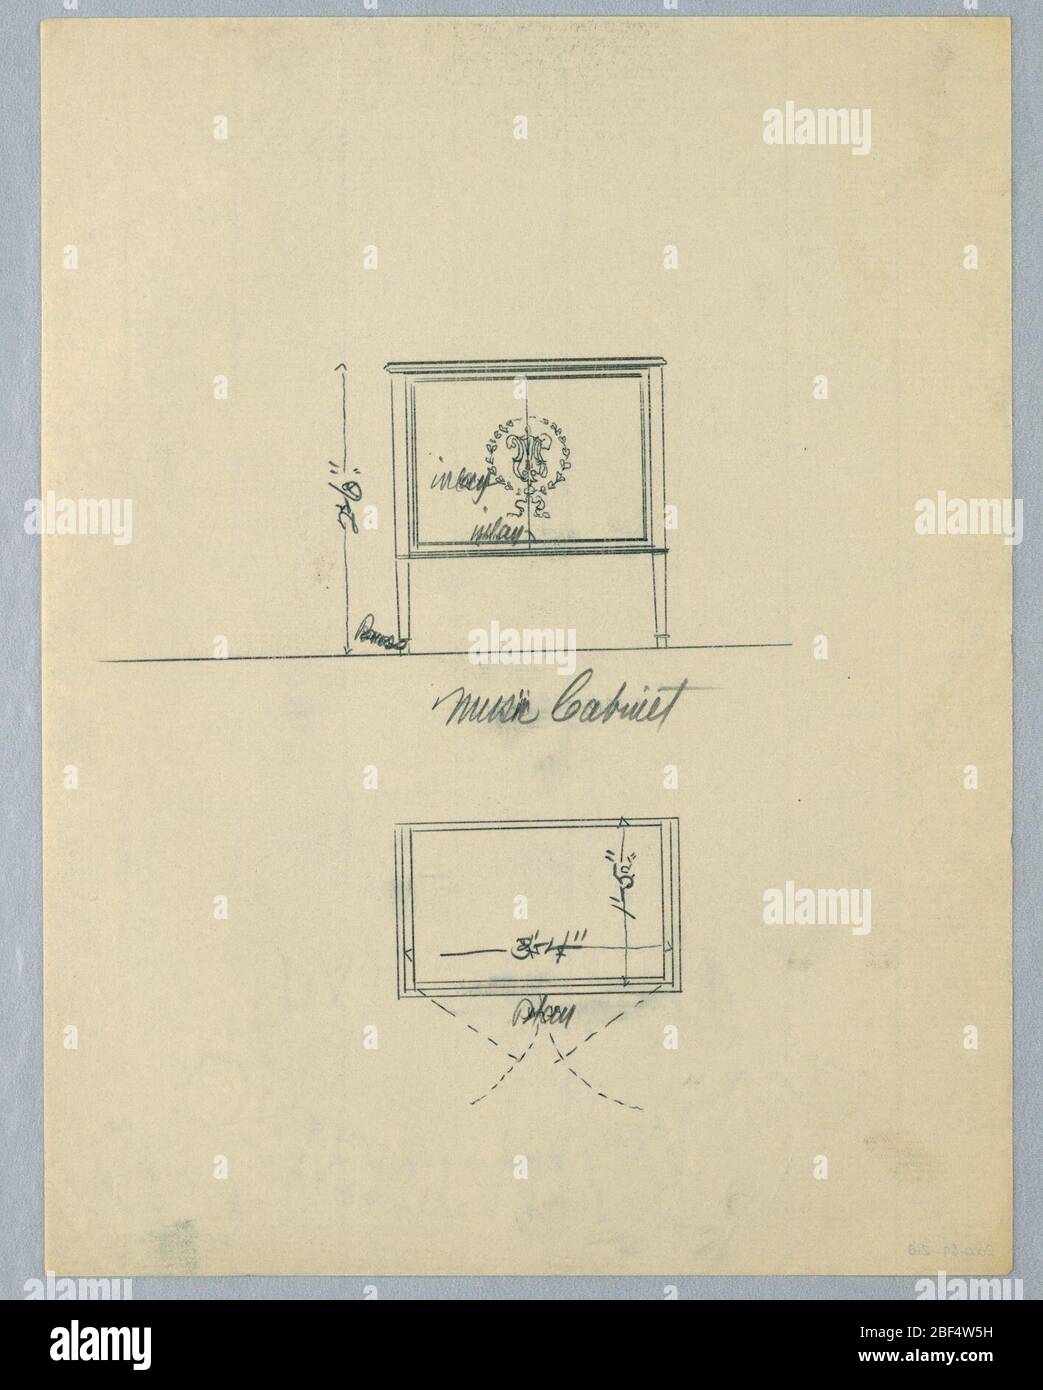 Elevation and Plan of Music Cabinet with Inlay. Elevation (upper half of sheet): rectangular 2-door panel at front with inlaid laurel wreath center; raised on straight slightly tapering feet. Plan (below center): rectangular top of cabinet. Stock Photo